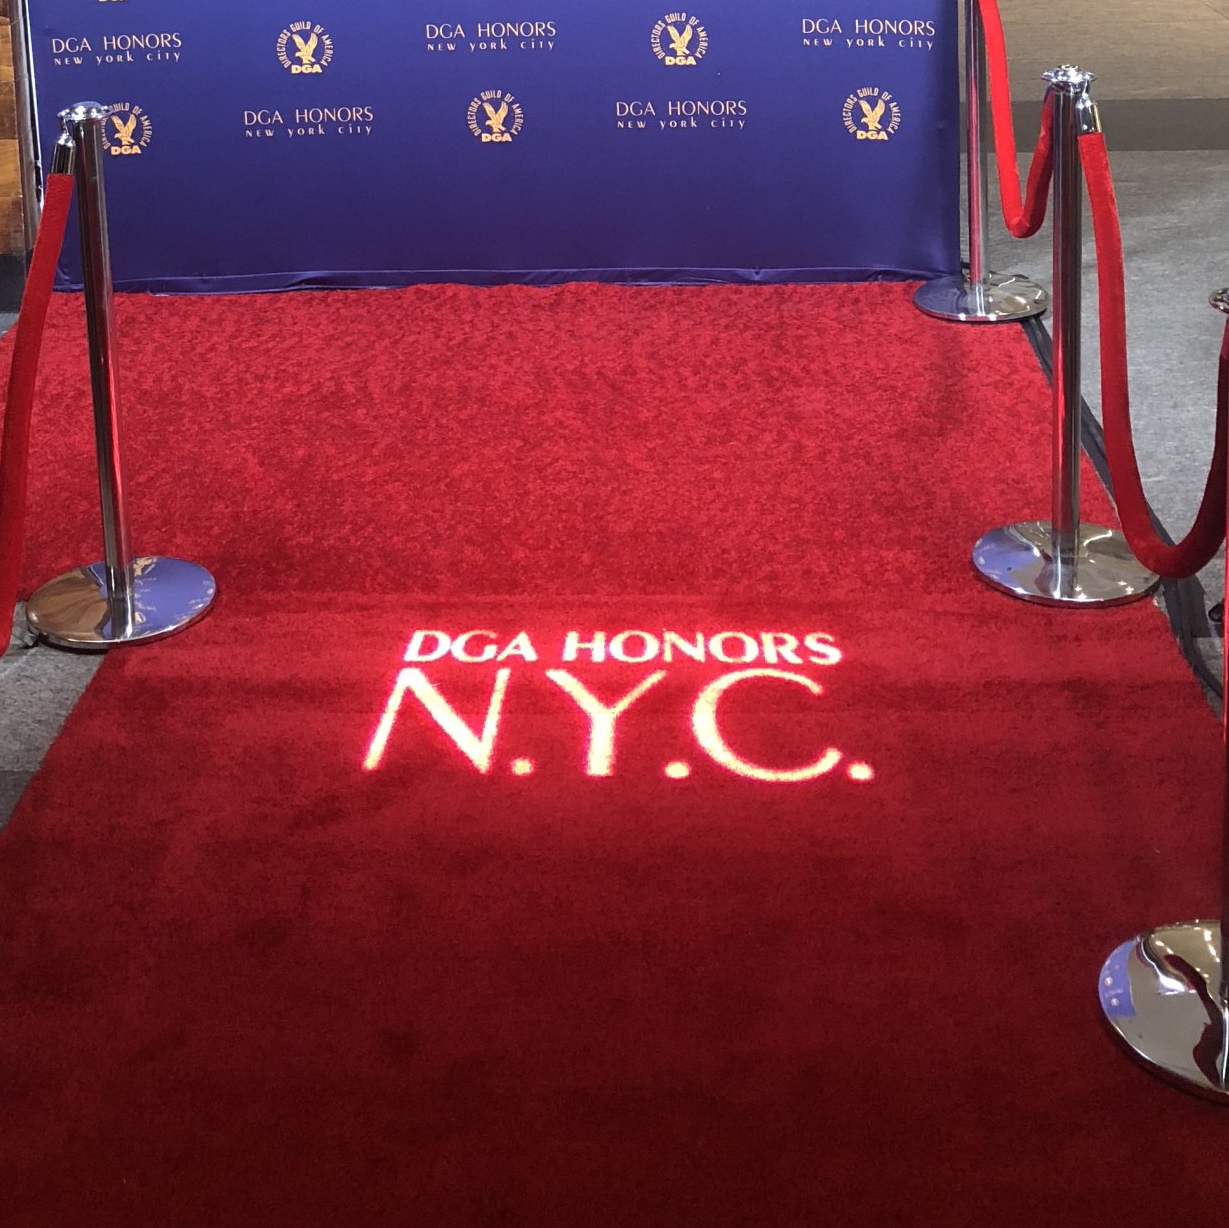 Gobo at event in New York City